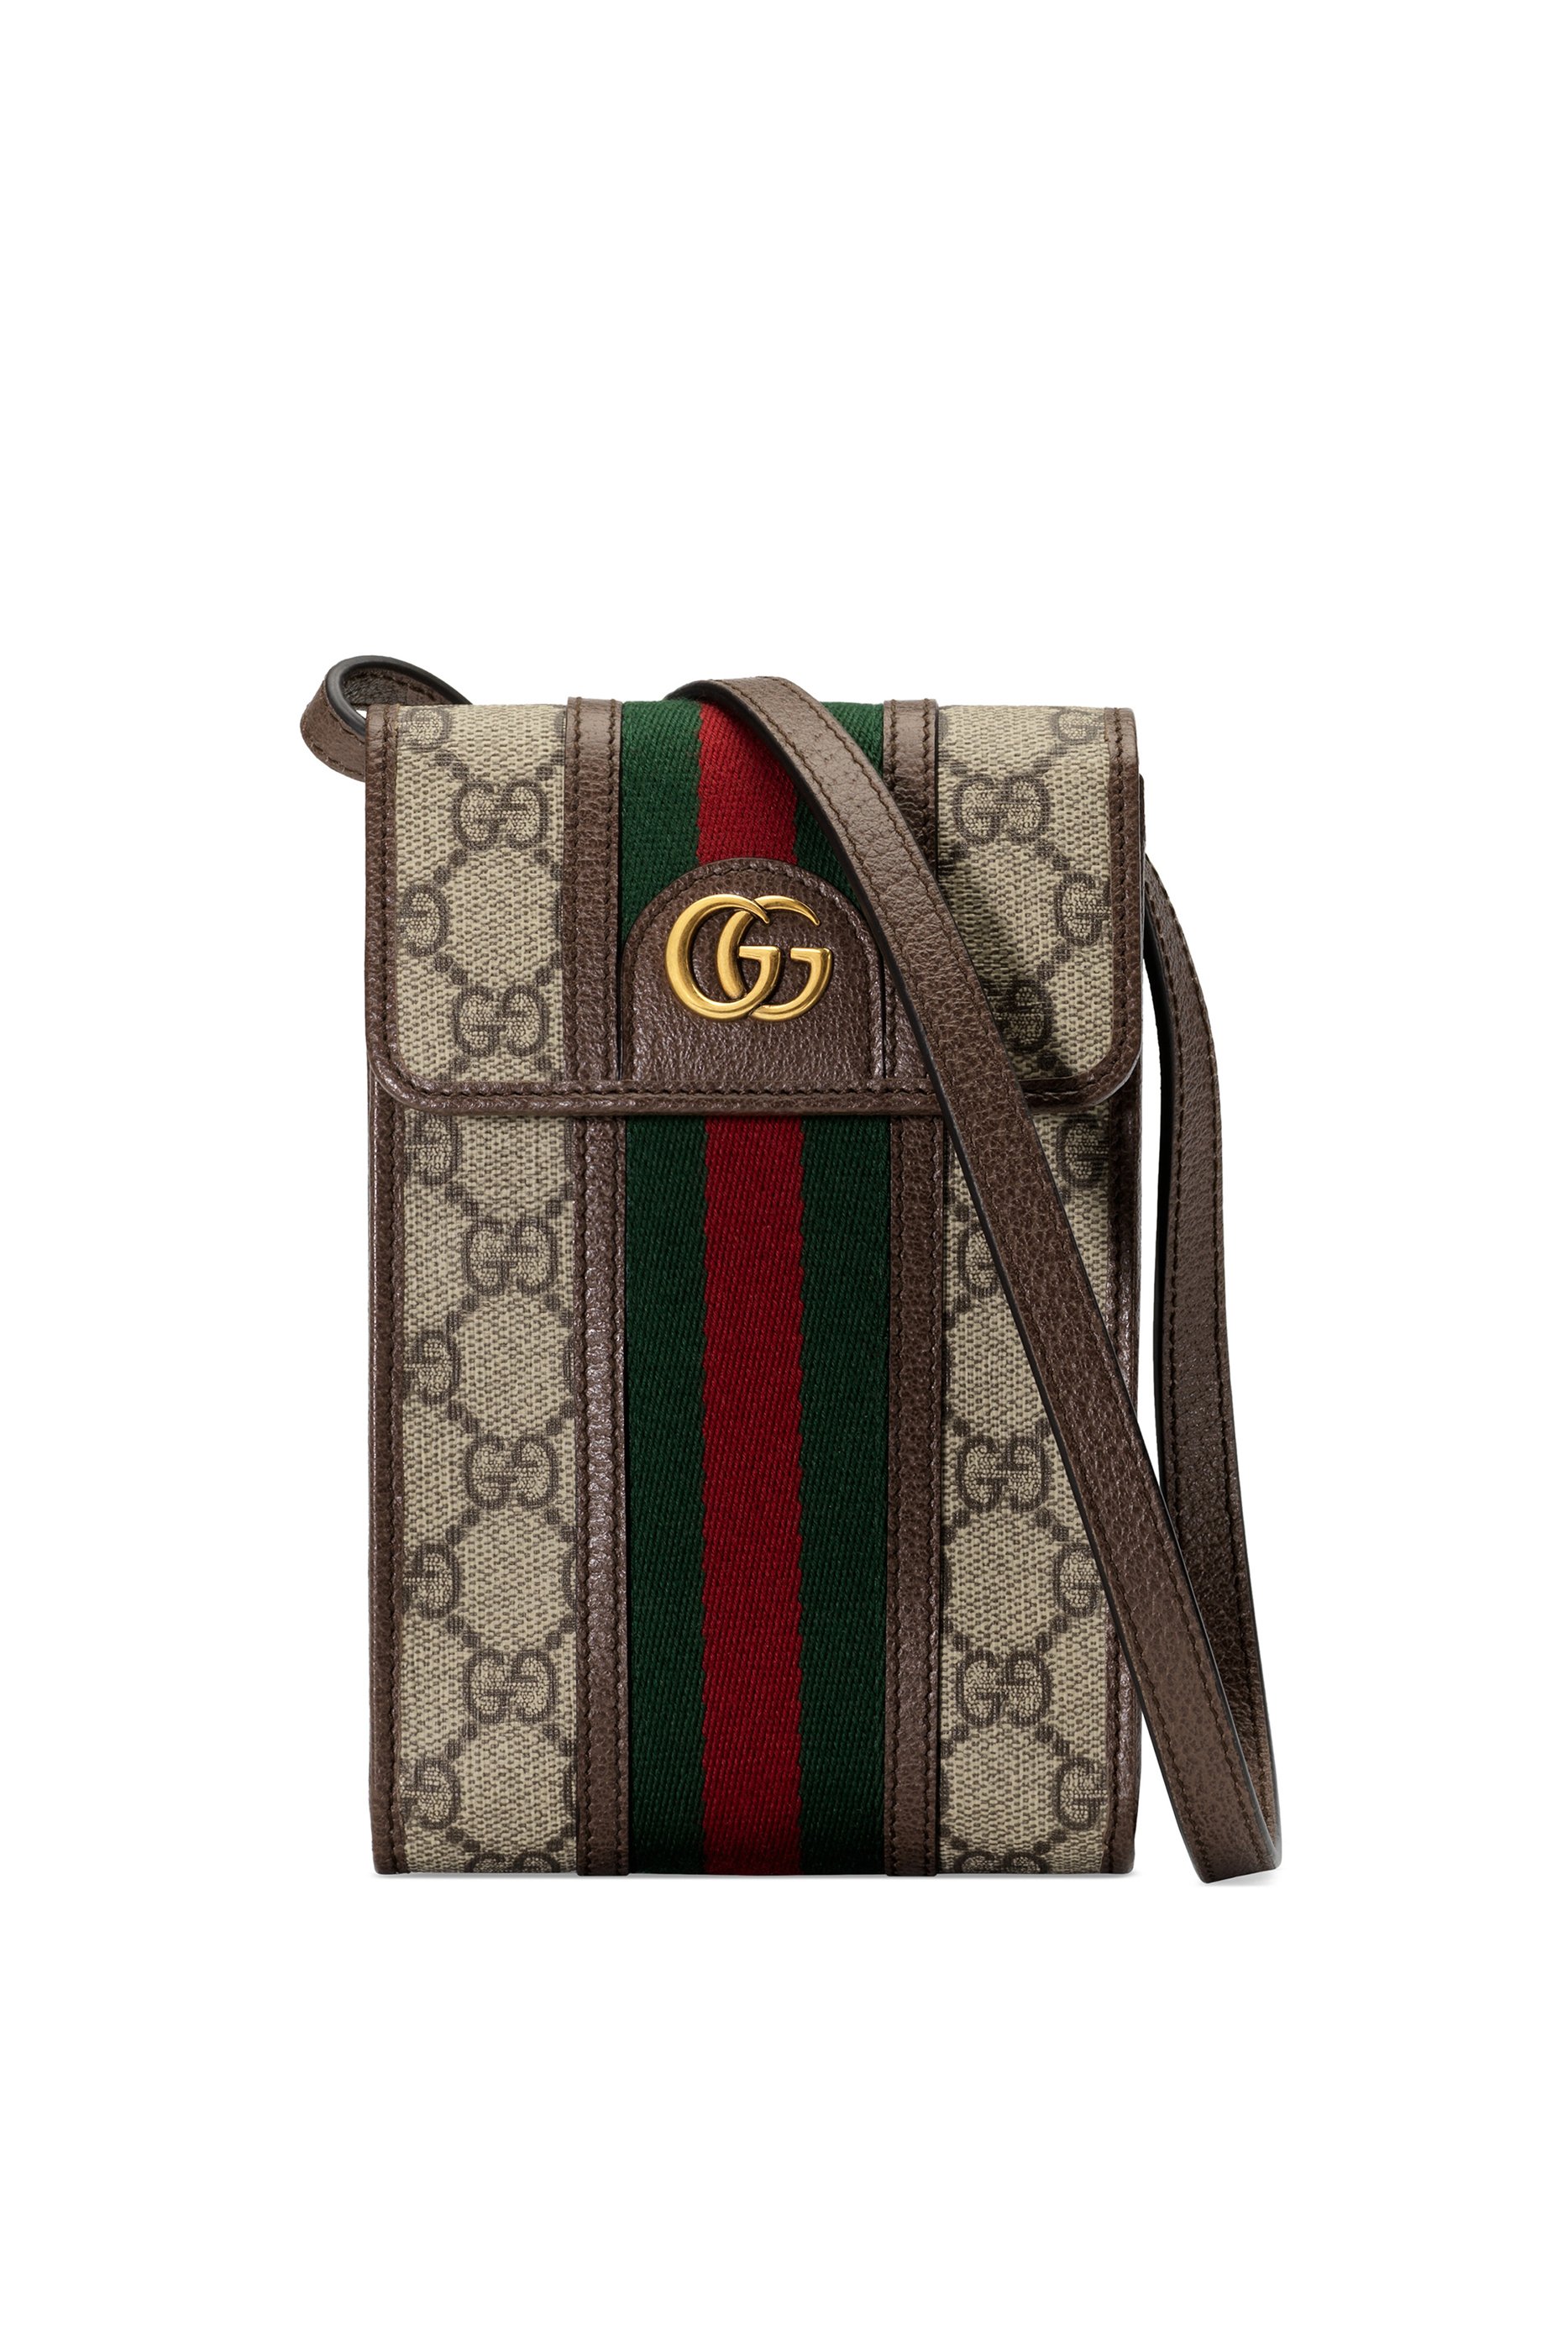 Jane Says Boho Bag (Black with Gucci Strap) – The Peppermint Pig Boutique